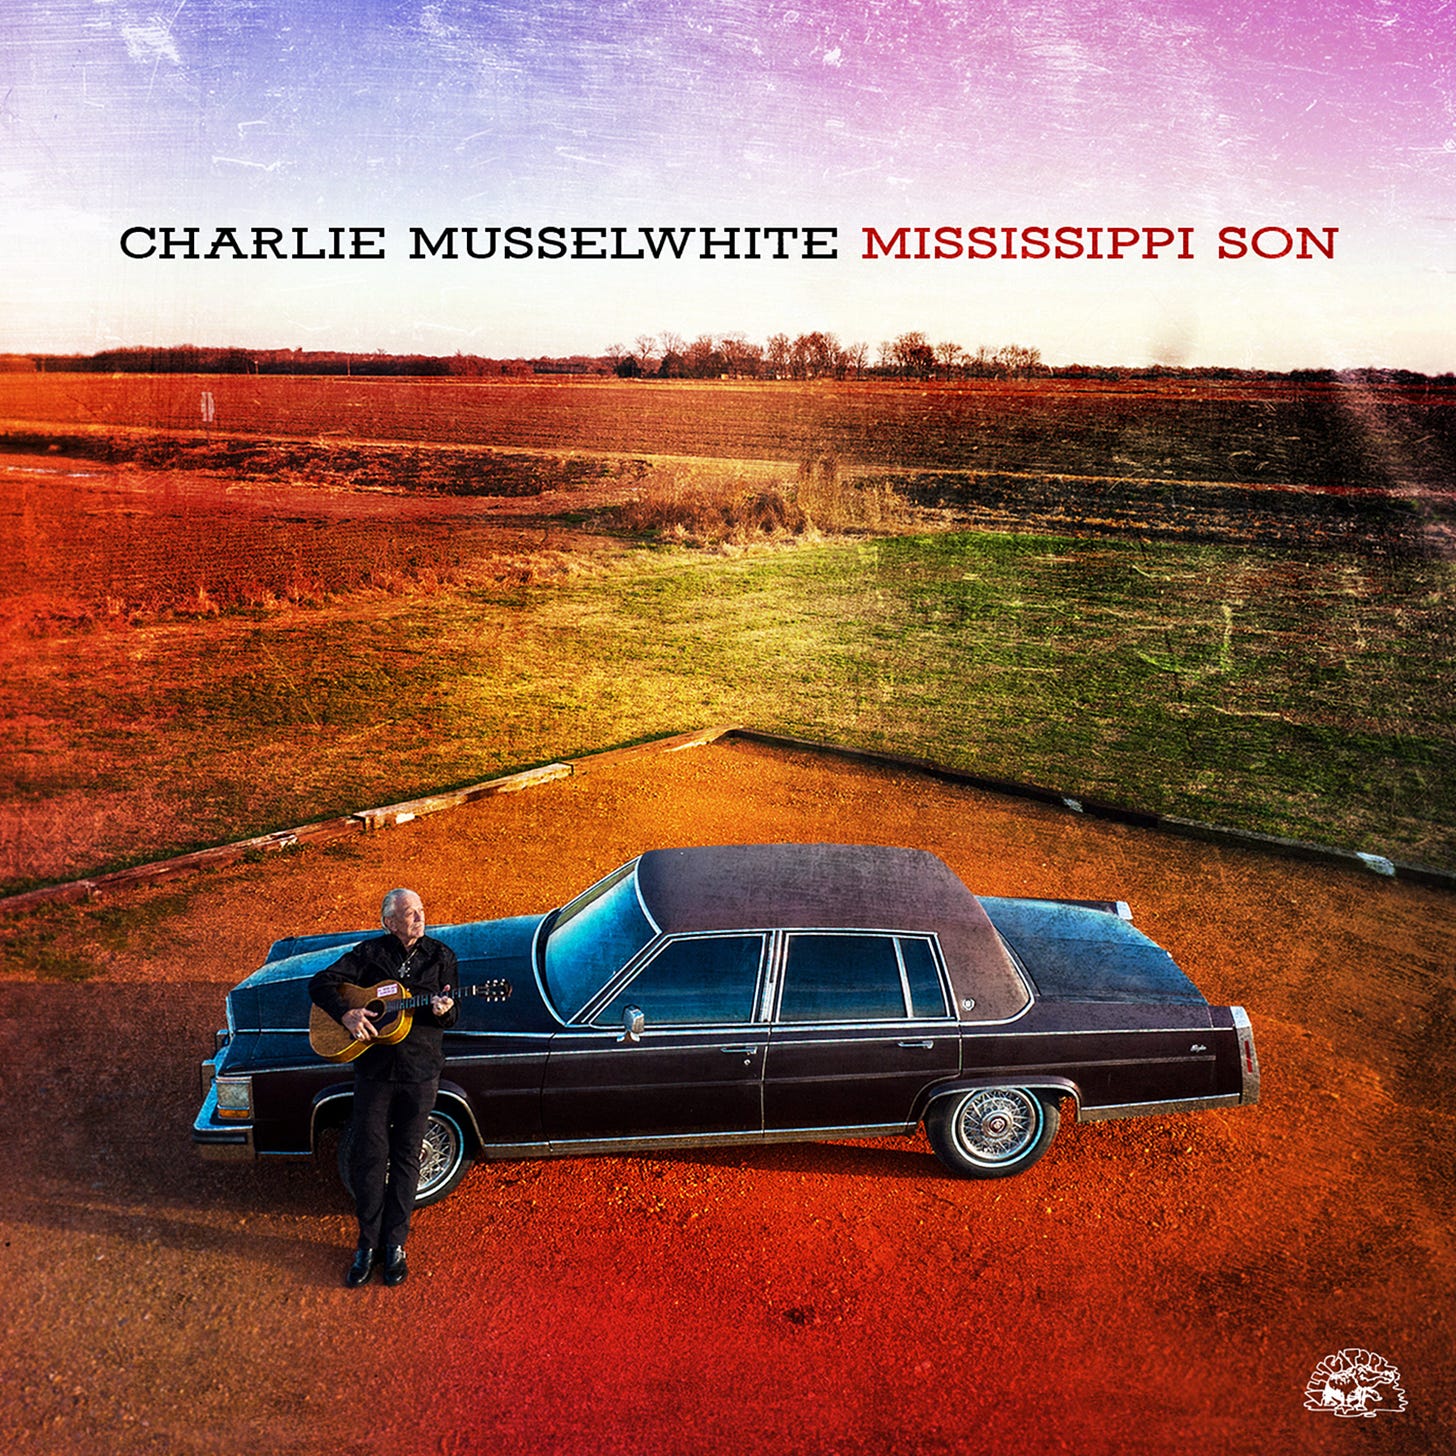 "Mississippi Son" by Charlie Musselwhite